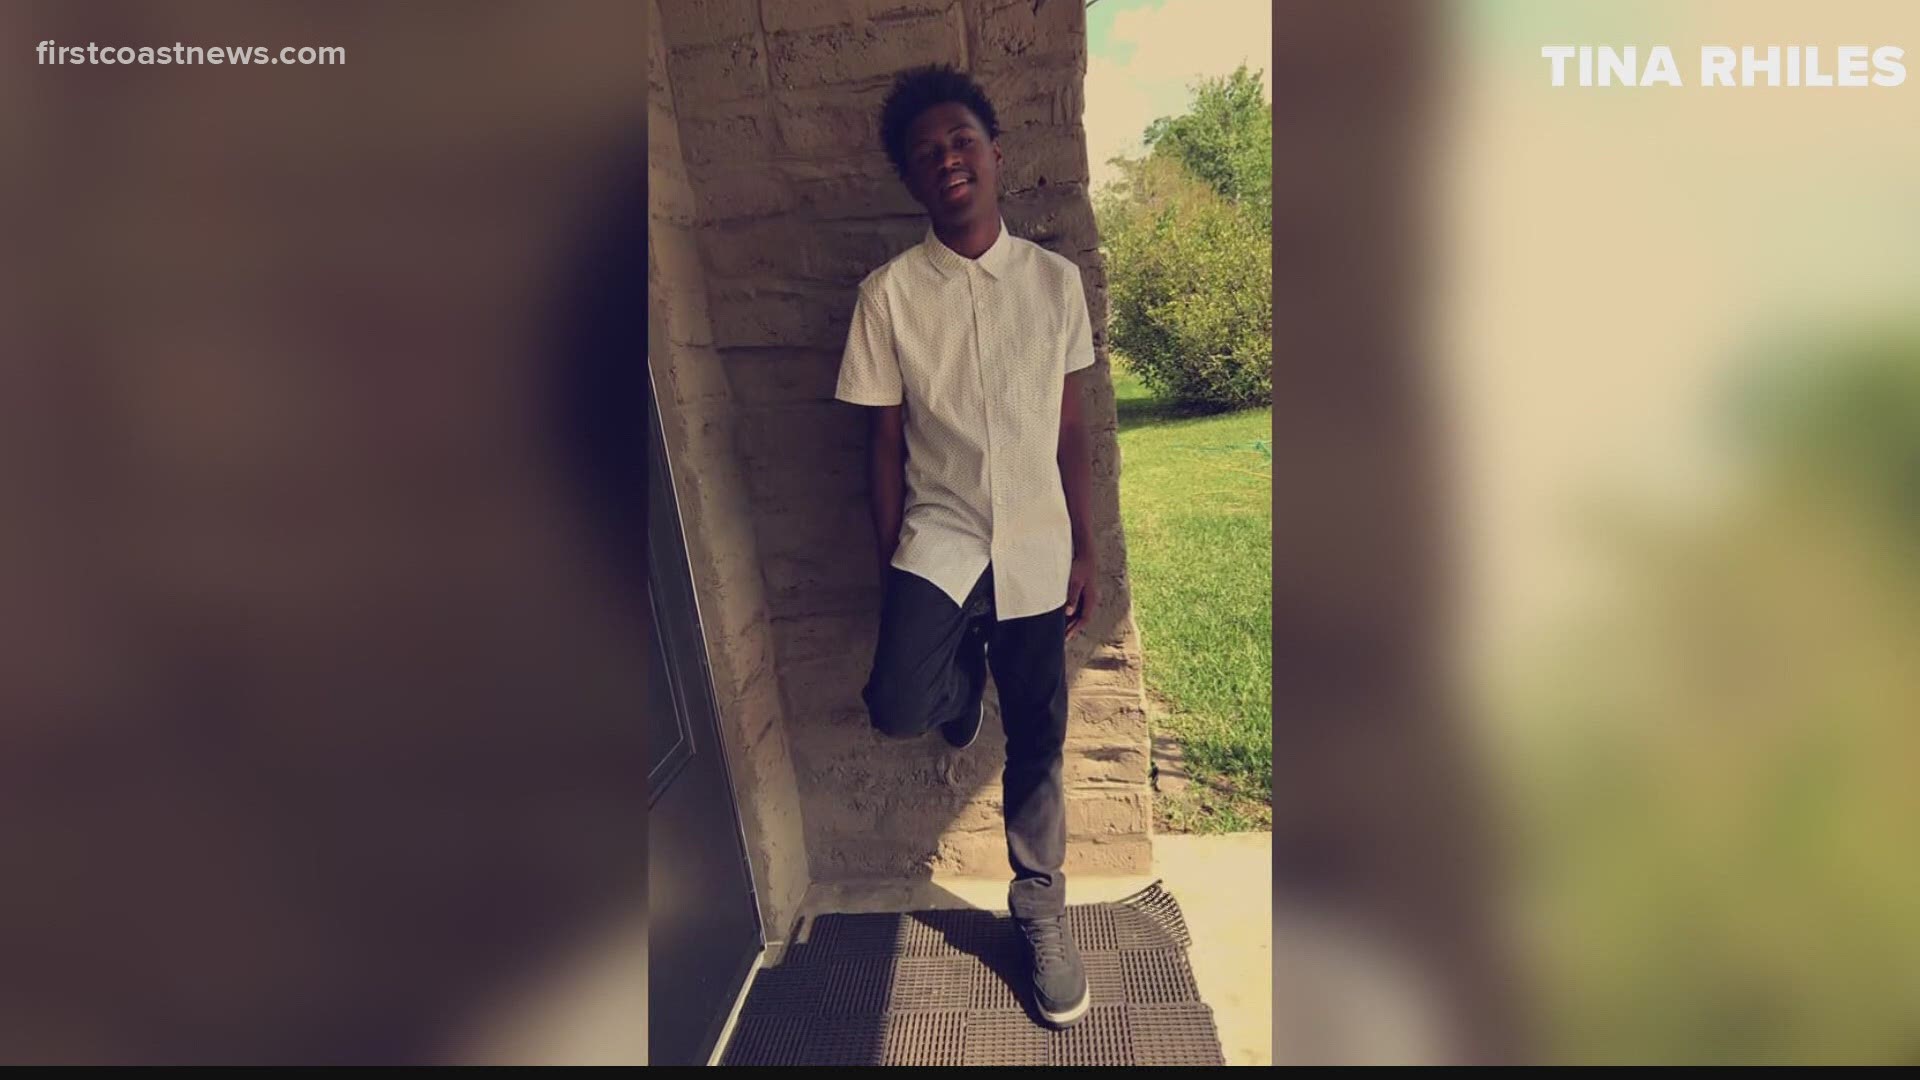 The family of 18-year-old Devon Gregory says an independent autopsy shows he was dragged out of the vehicle by police dogs after he was shot several times.